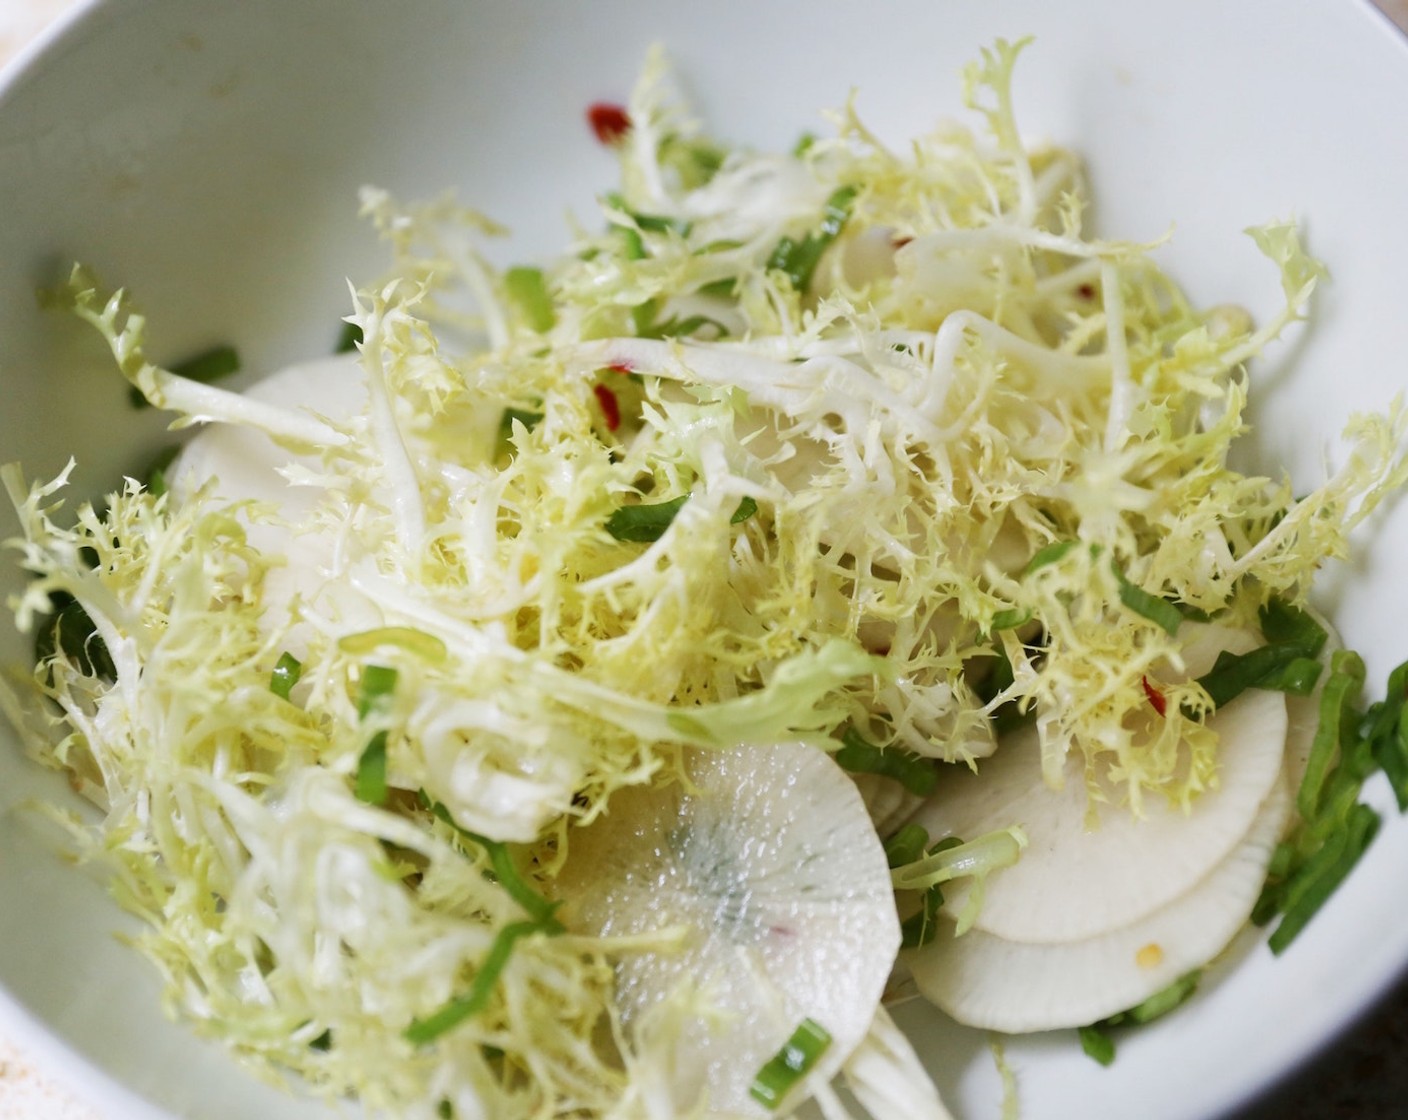 step 13 Toss the Curly Endive (2 cups), Daikon Radish (1 cup), and the green part of the Scallion (1/3 cup) with the dressing.